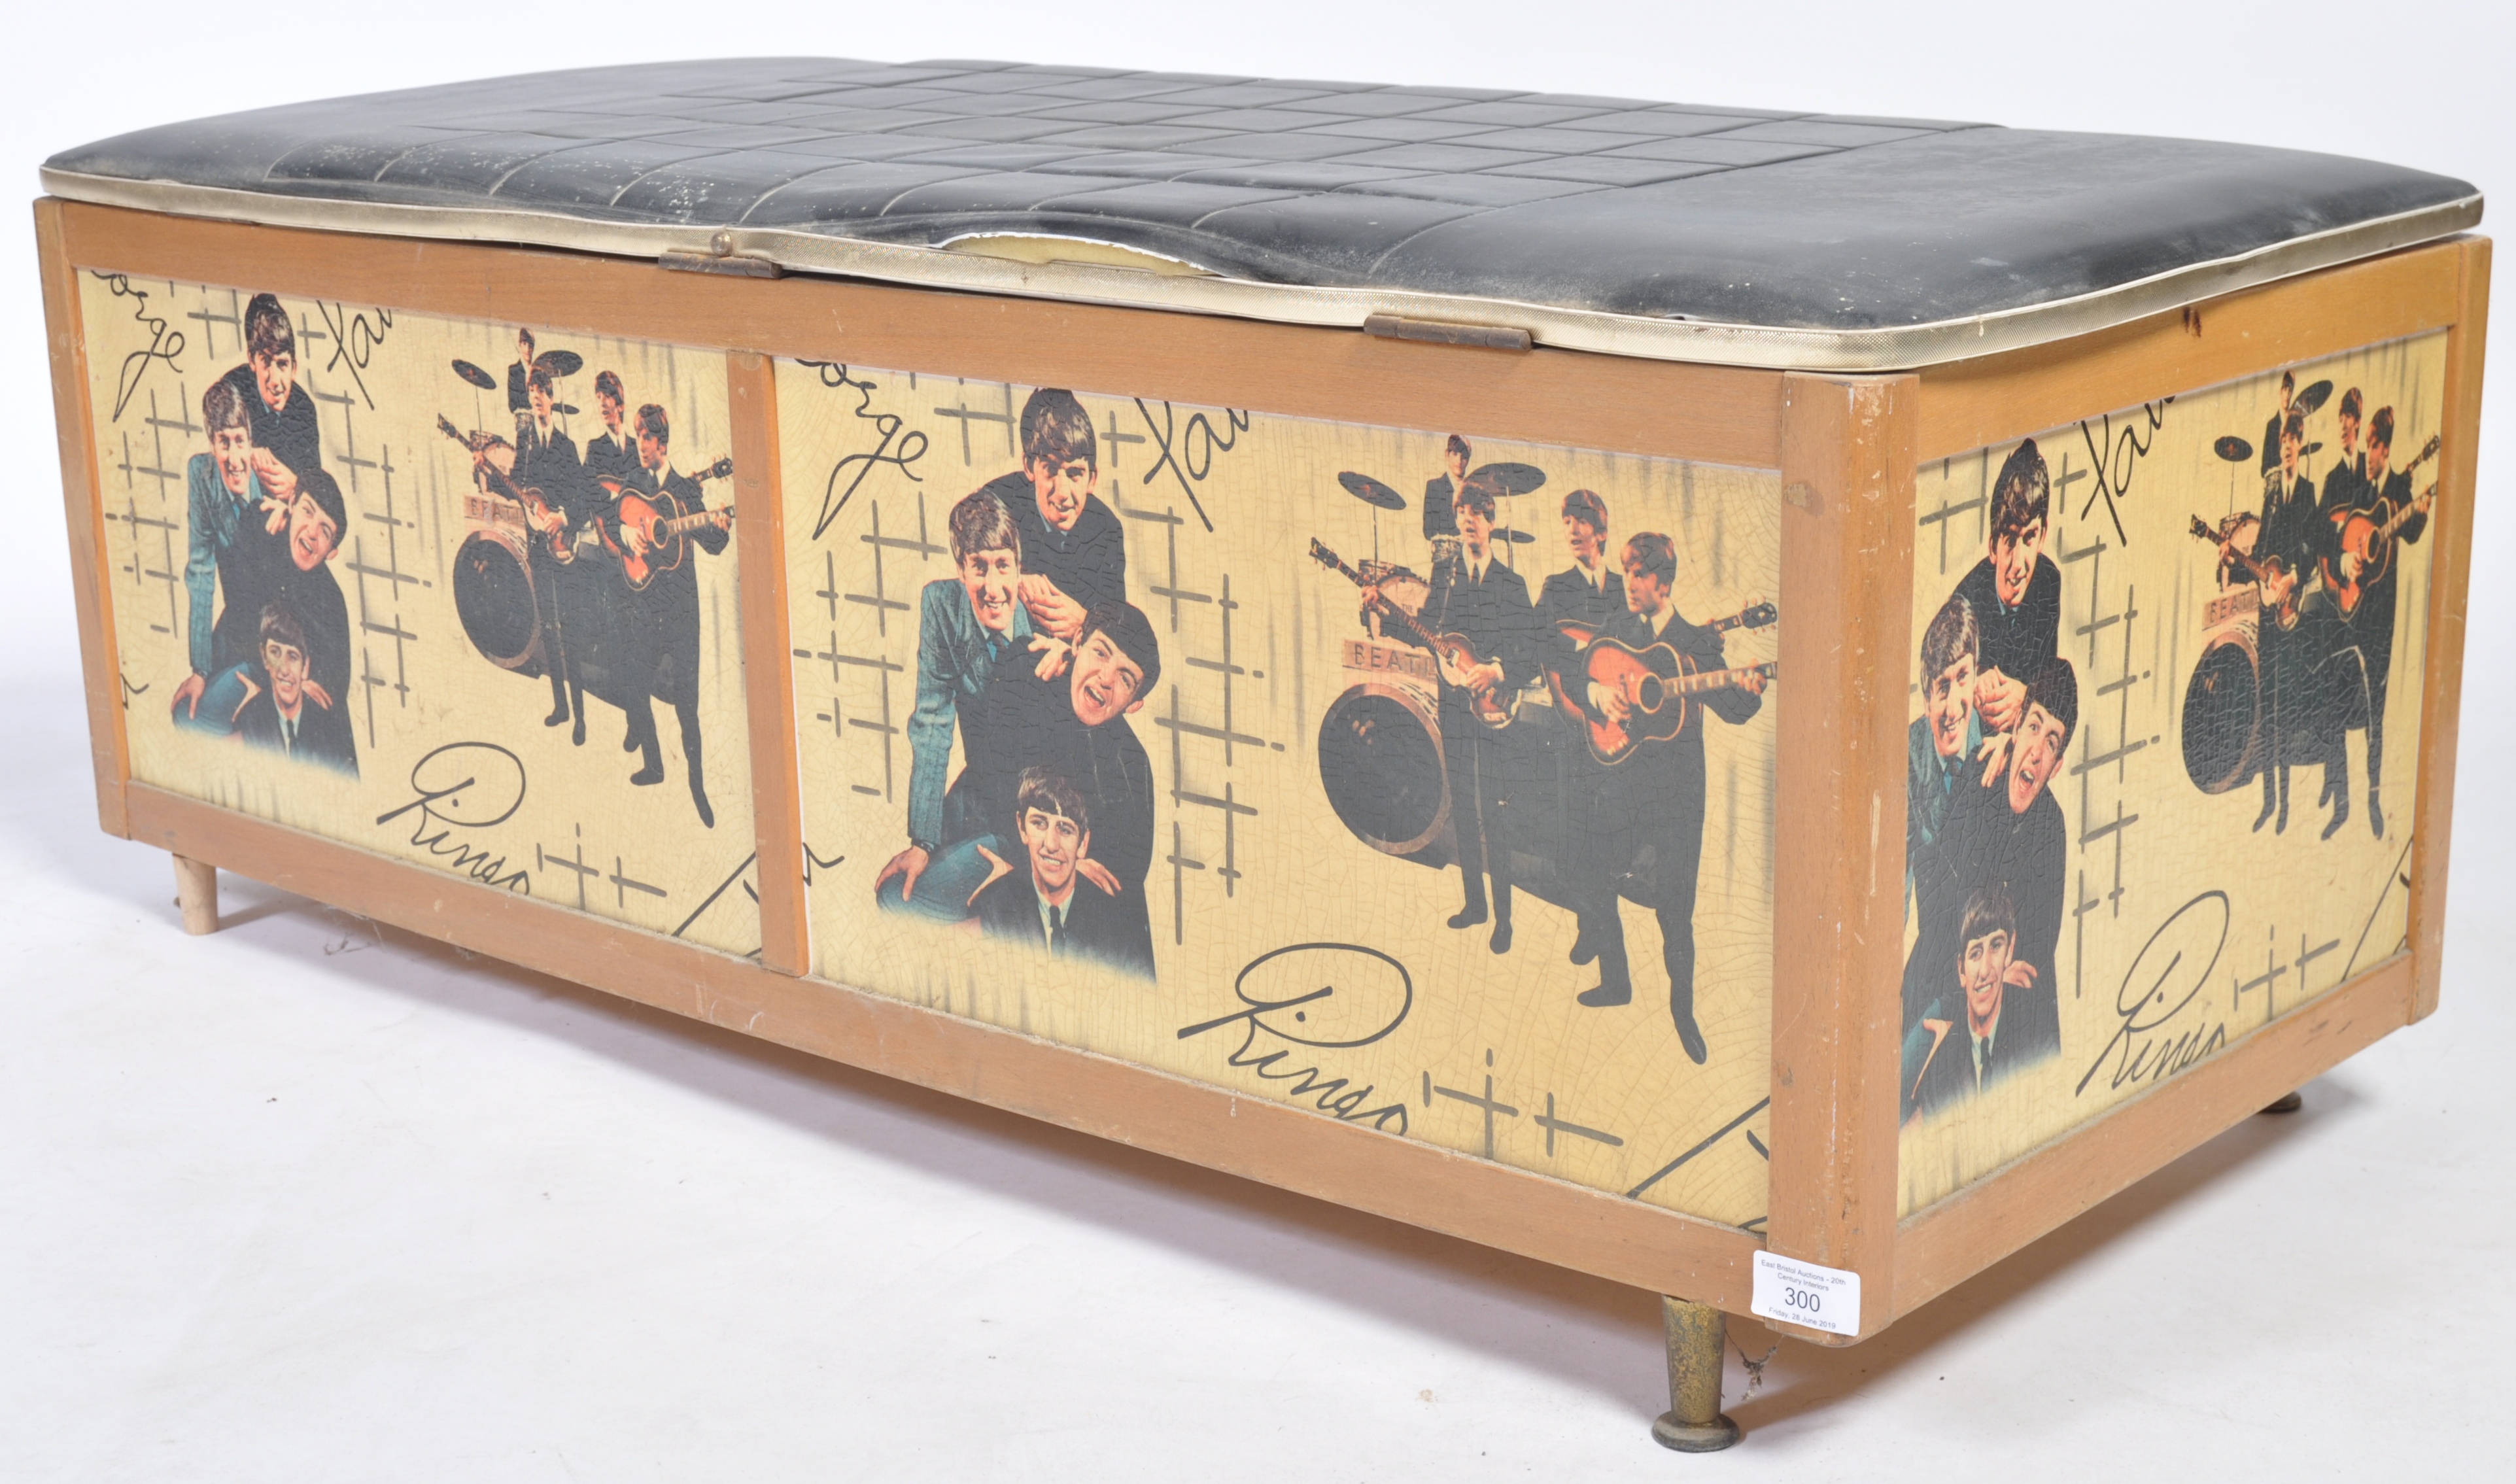 RARE 1960'S BEATLES OTTOMAN / BLANKET BOX BY AVALO - Image 2 of 8